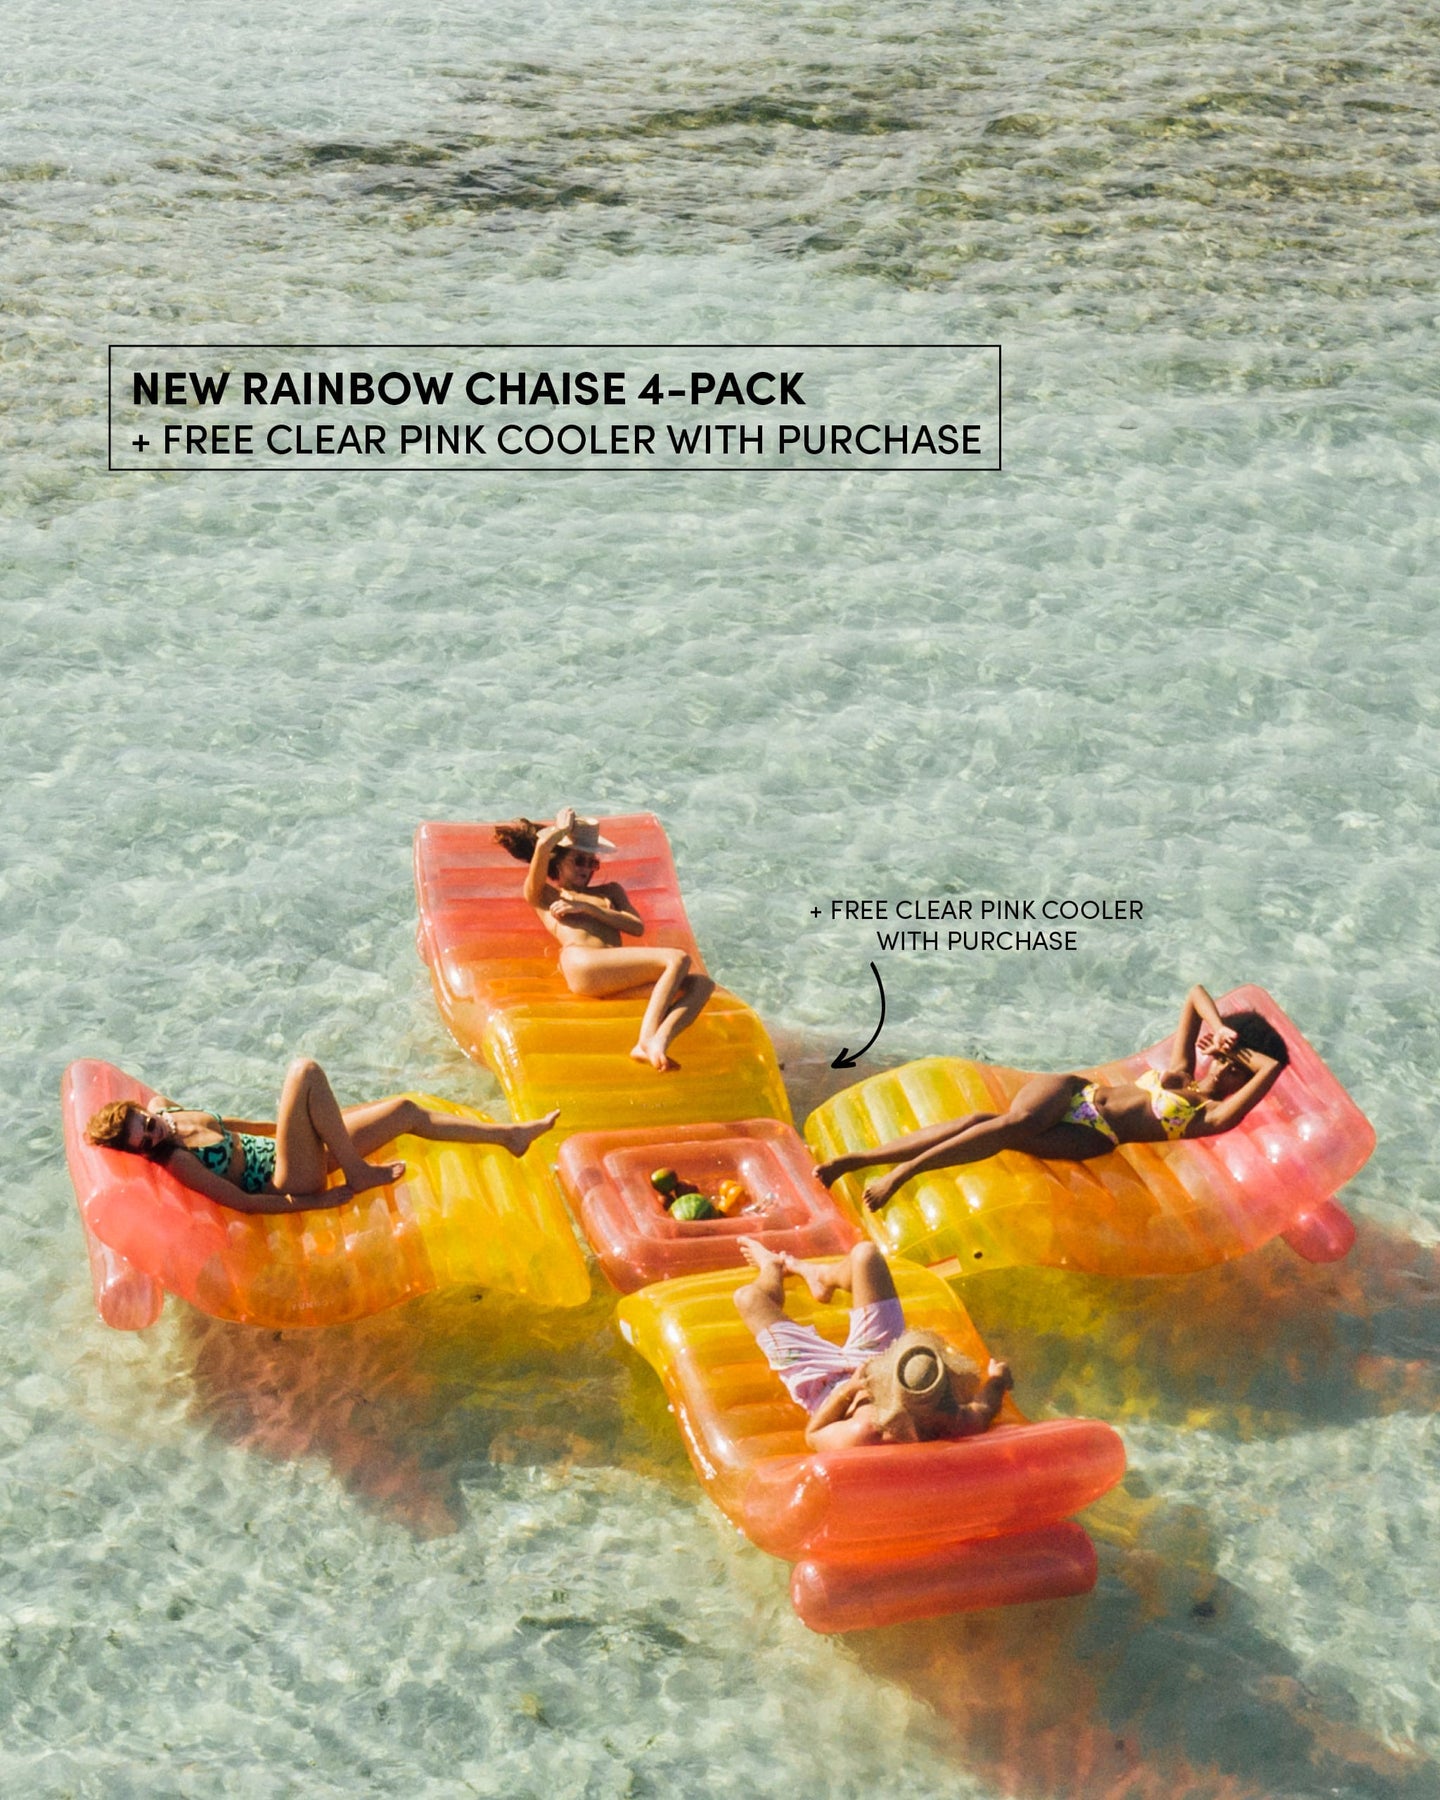 New Rainbow Chaise 4-Pack + Free Cooler with purchase